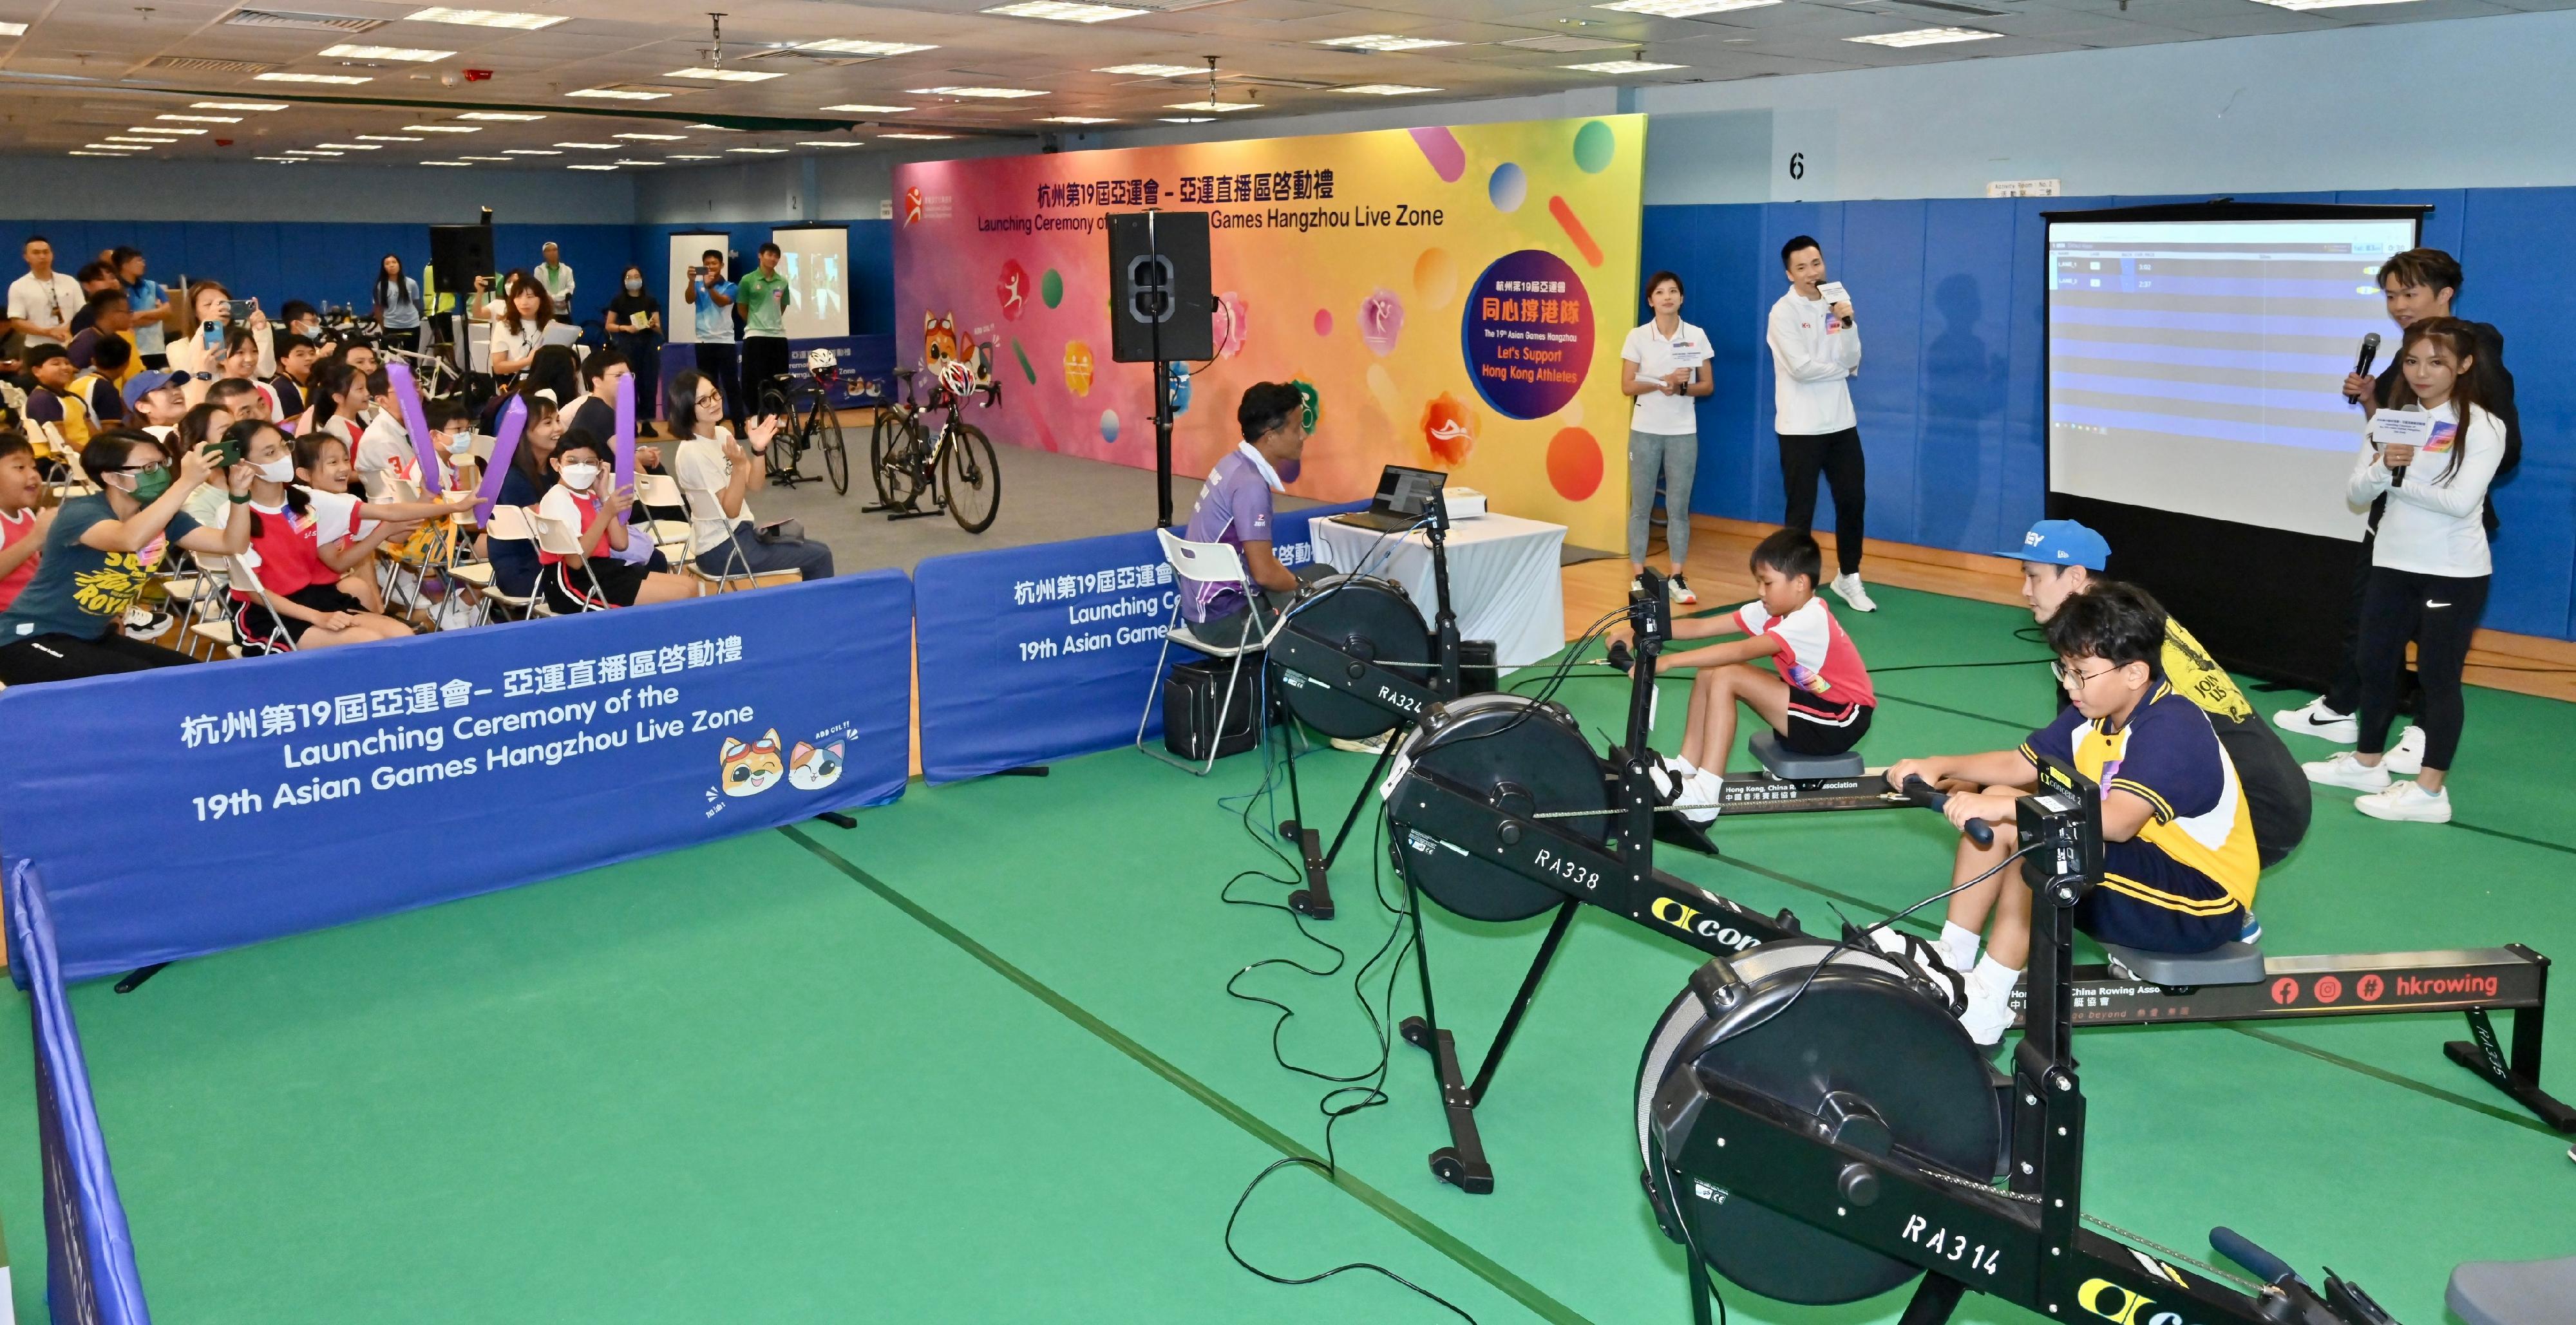 The Leisure and Cultural Services Department held the "Launching Ceremony of the 19th Asian Games Hangzhou Live Zone" at the Secondary Hall of the Kowloon Park Sports Centre today (September 23). Photo shows some members of the public participating in a rowing play-in session.